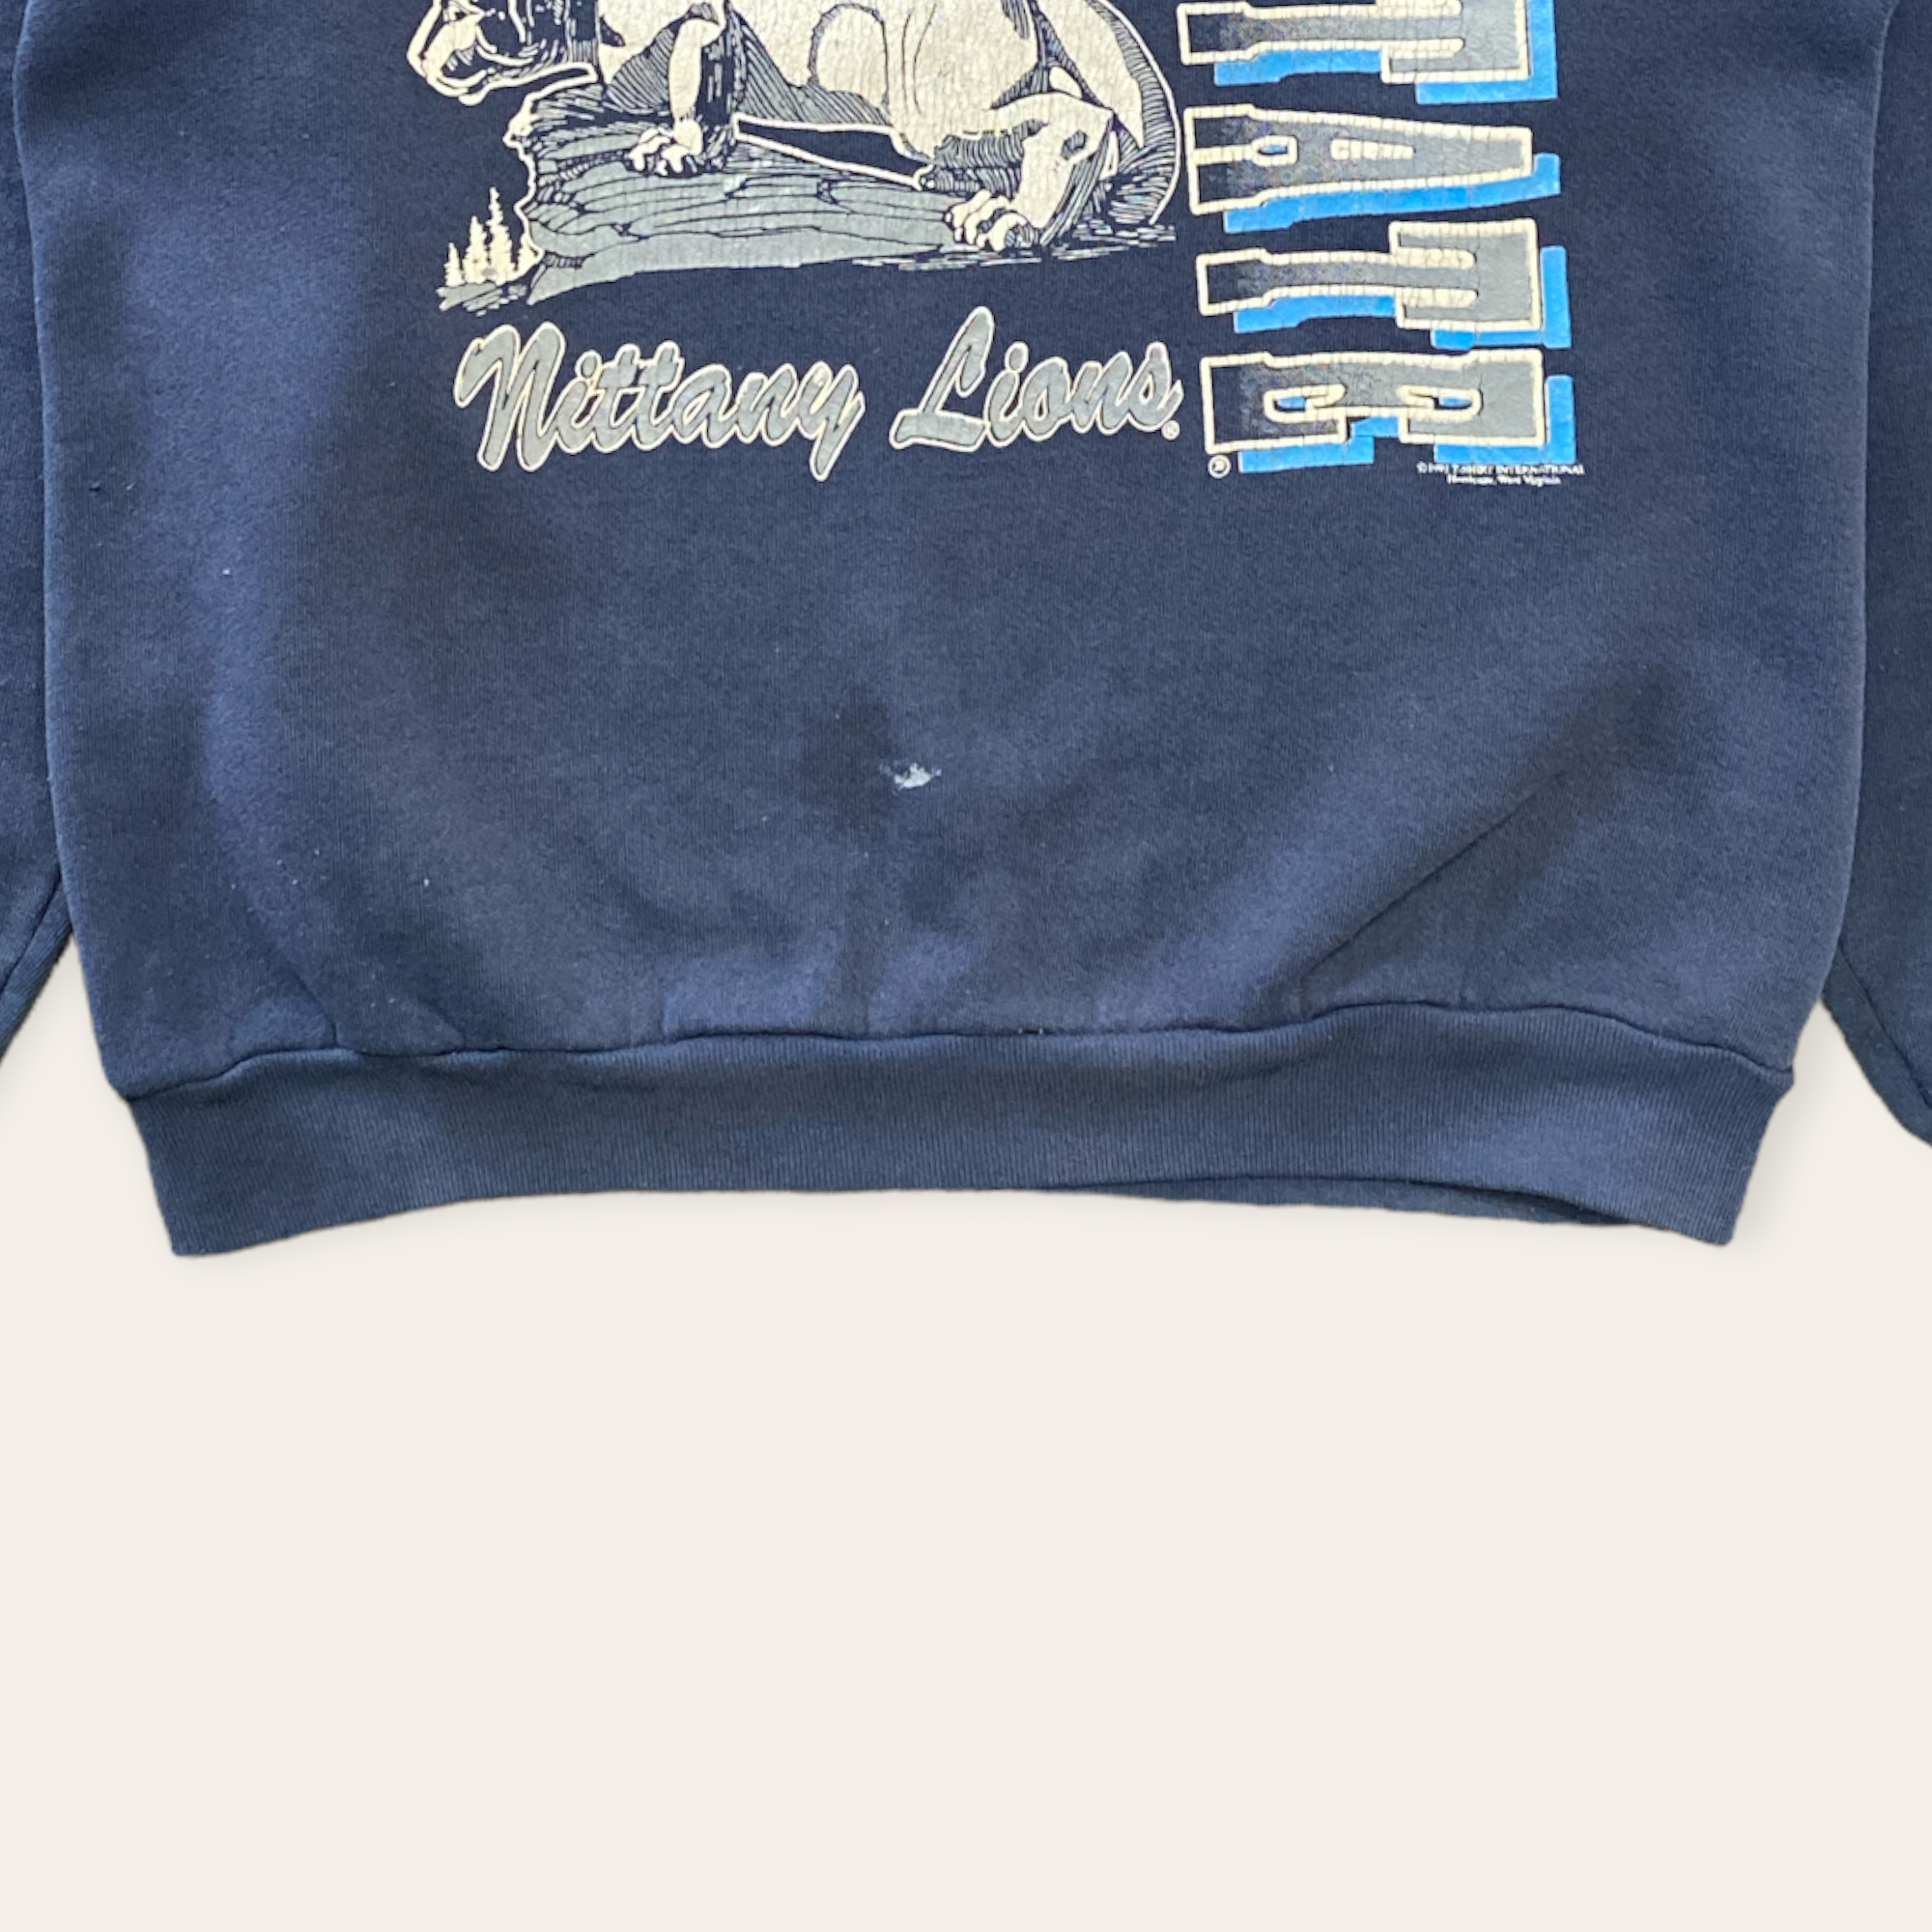 1991 Penn State Nittany Lions Sweater Size L